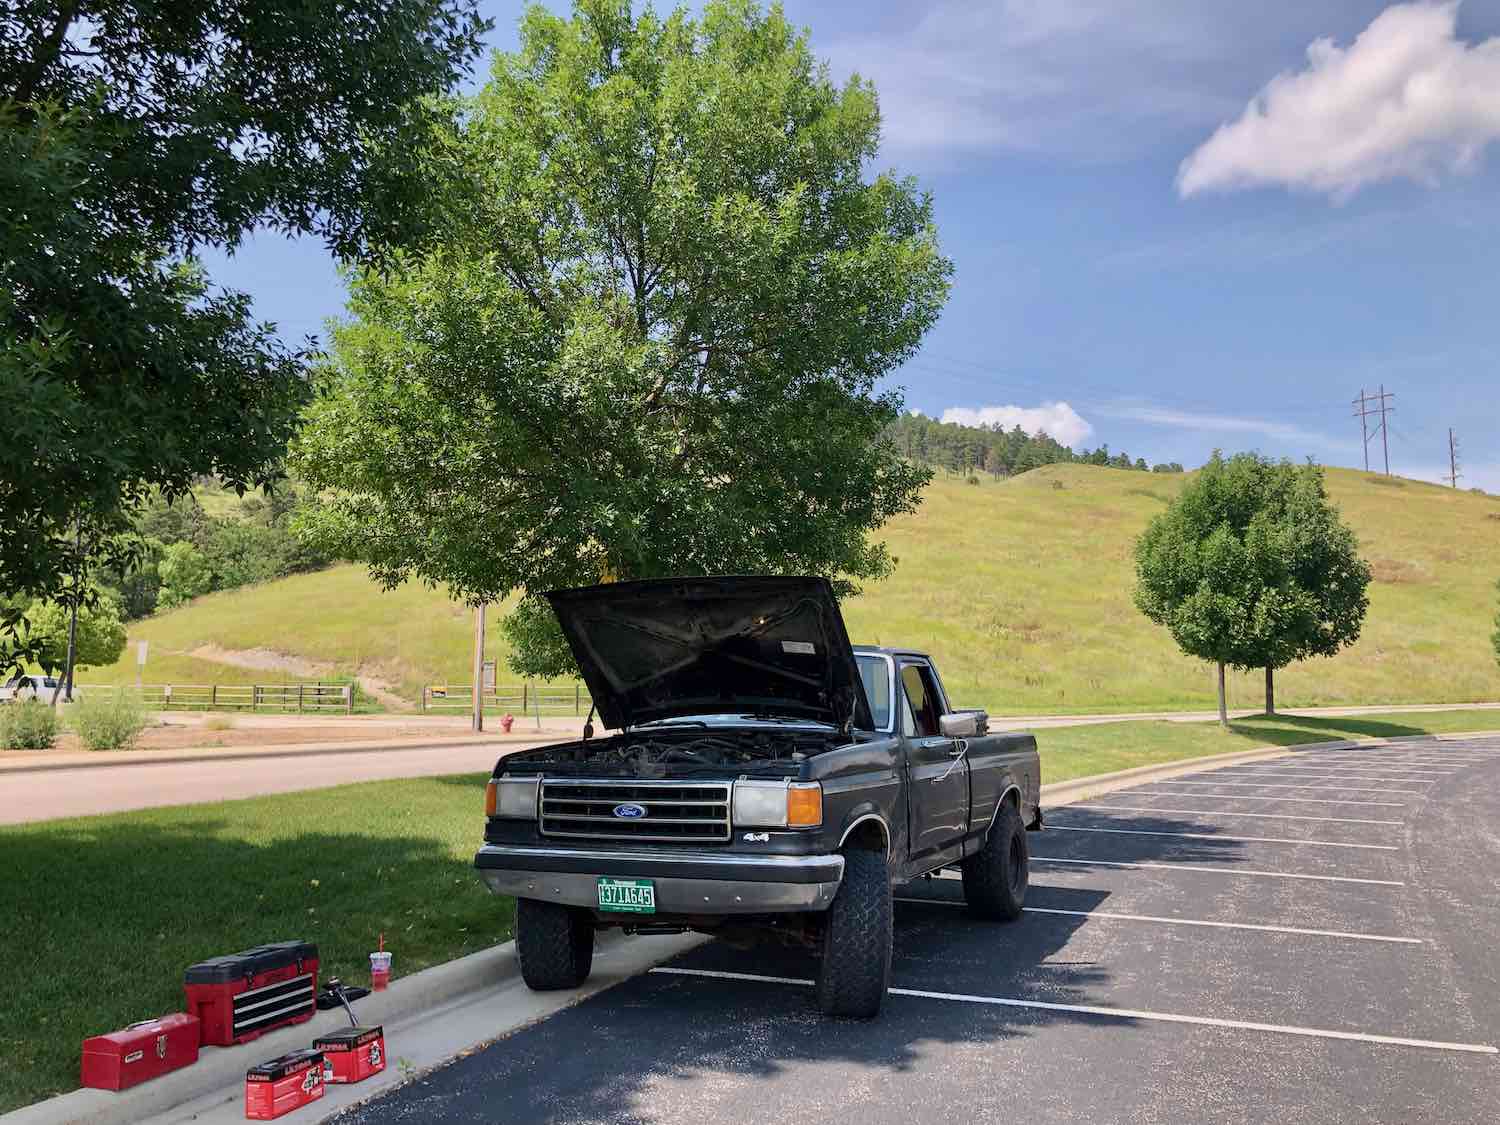 This is Henry Cesari's black 1988 Ford F-150 in a parking lot with its hood up for repairs it's an example of an 80s and 90s truck.